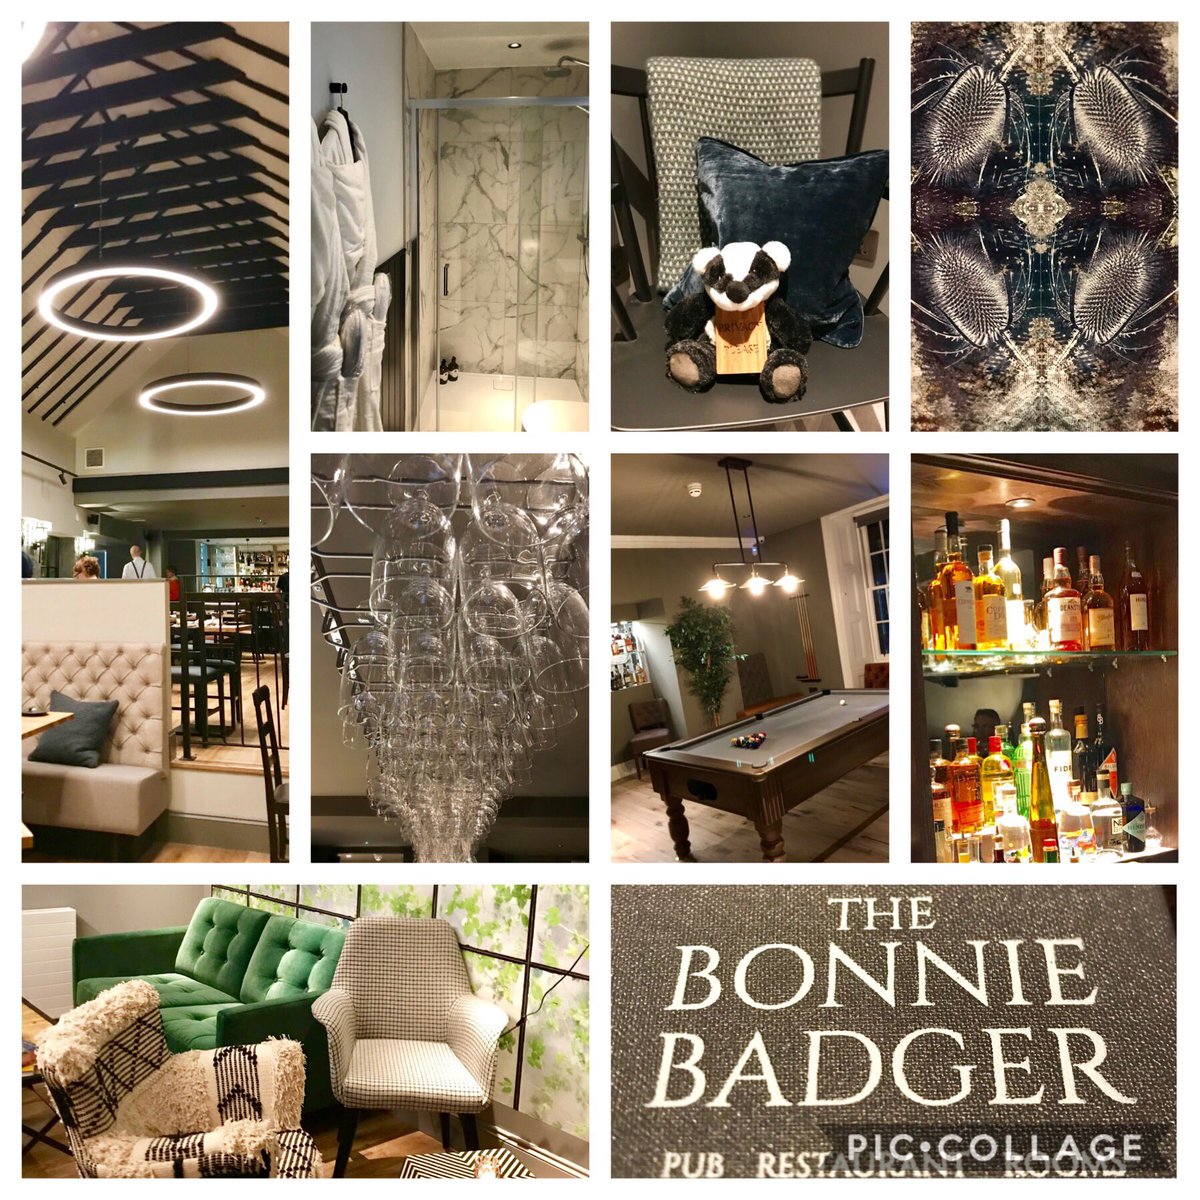 ⁦@bonniebadgerg⁩ is the new venture of ⁦@mickitchin⁩ and ⁦@TomKitchin⁩ ...get it on your must visit list ... #warm #stylish #friendly and of course #amazingfood #Gullane #Scottishproduce #ScotlandIsNow #BonnieBadger #hotel #restaurant #bar #familyfriendly